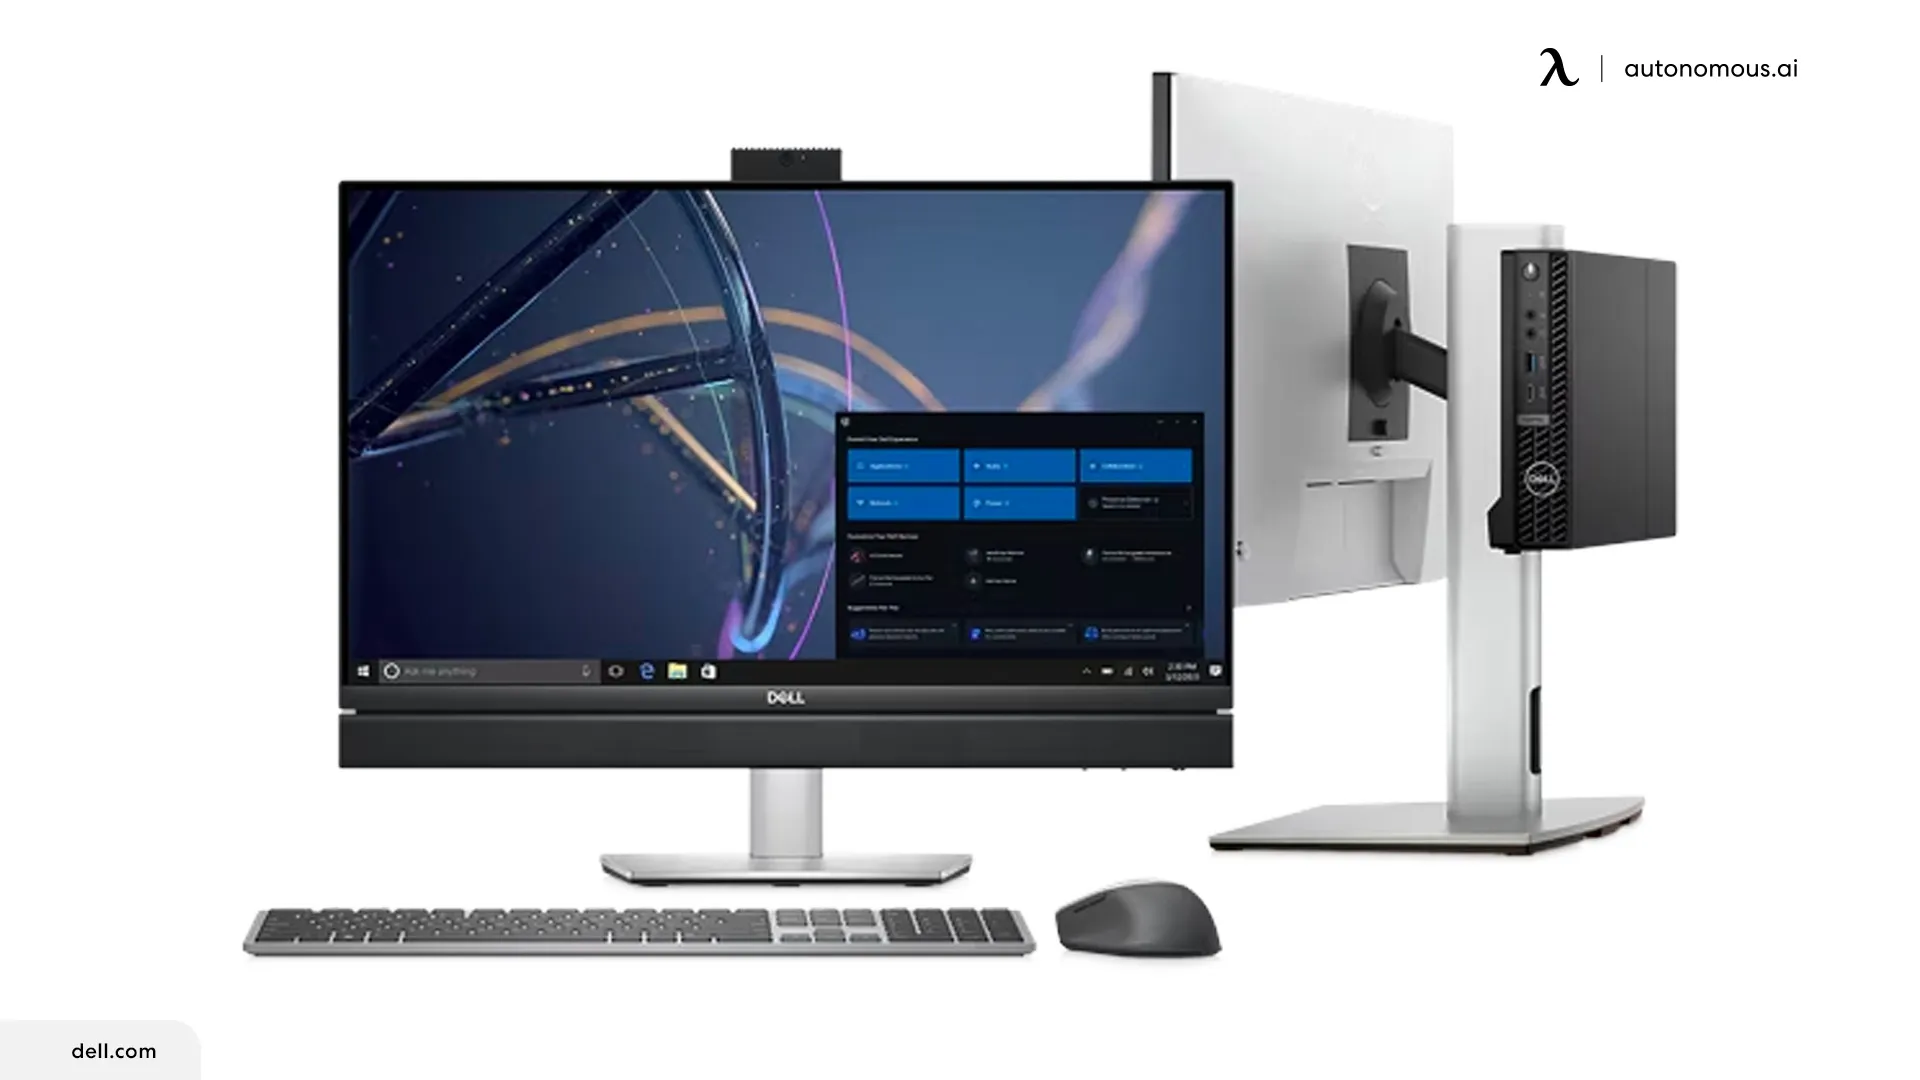 Dell Presidents' Day monitor sale